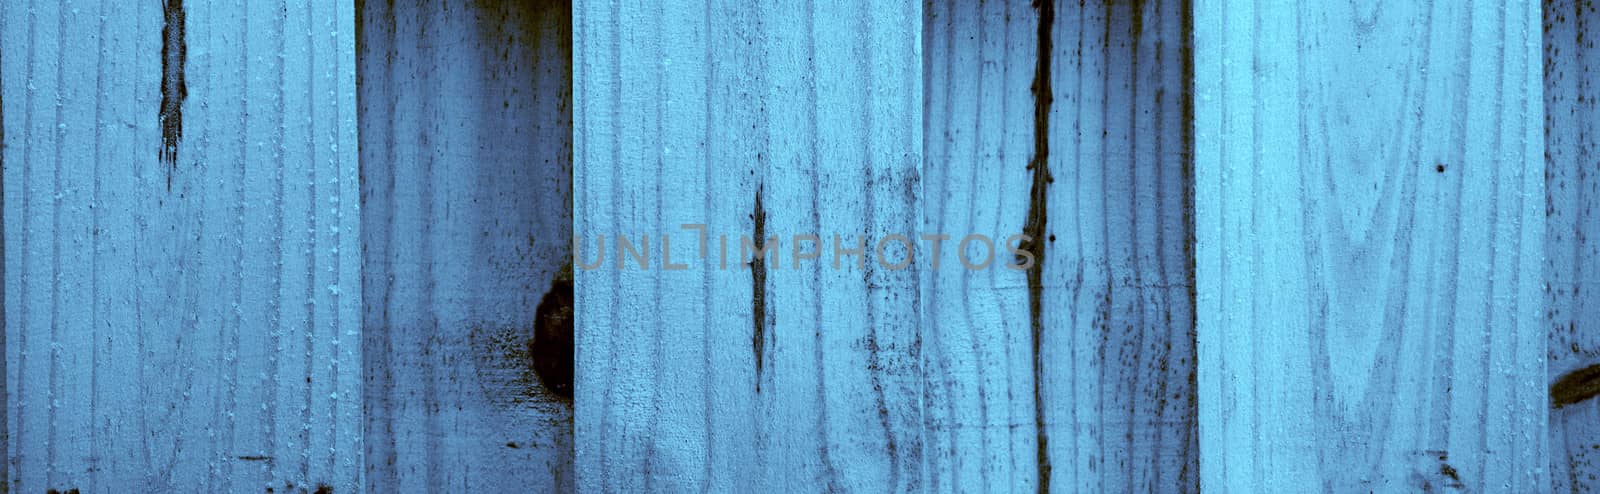 natural wood banner background in blue by ftlaudgirl